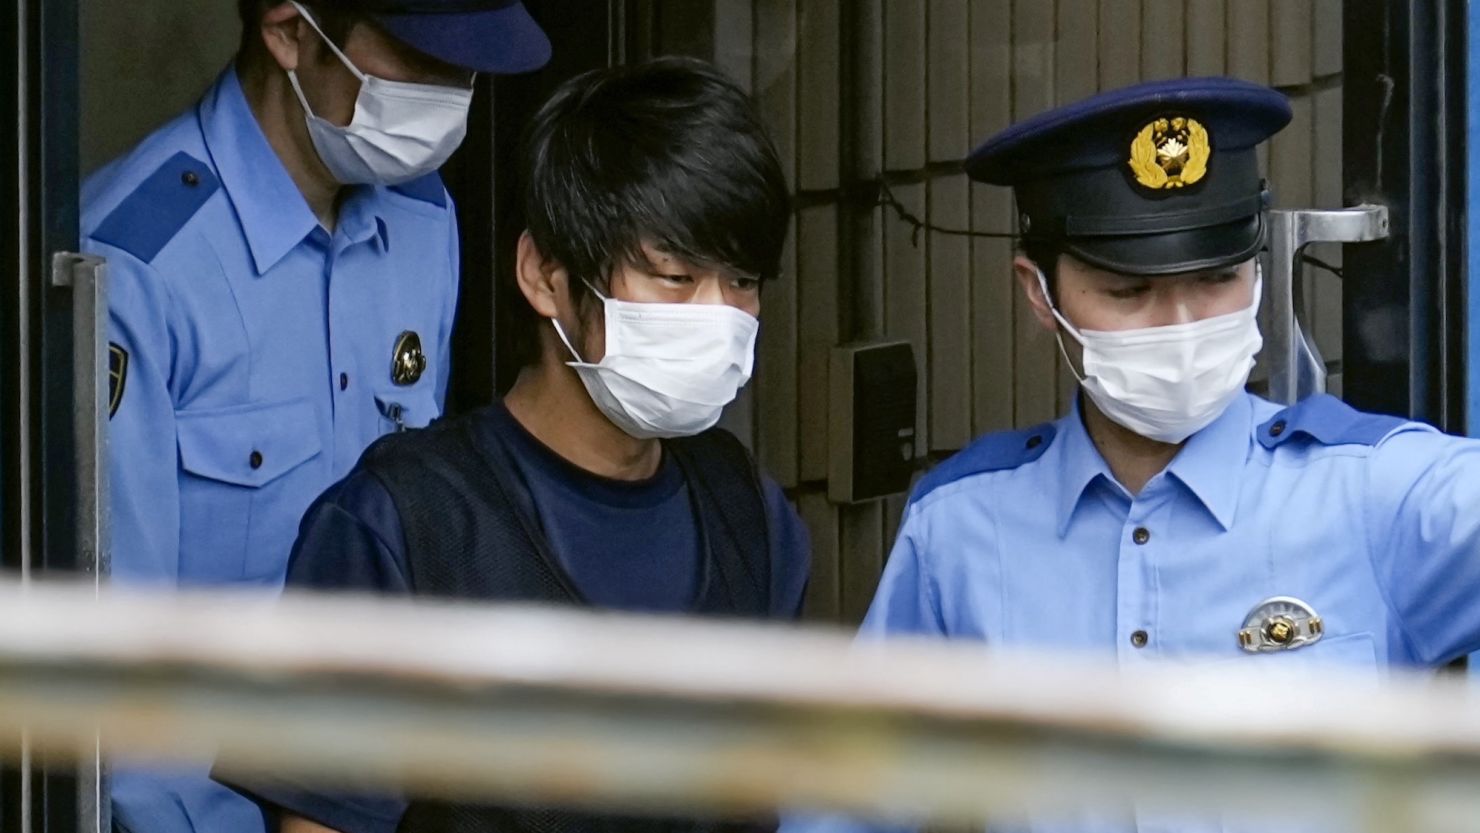 Tetsuya Yamagami is escorted by police officers at a police station in Nara, western Japan on July 10, 2022. 